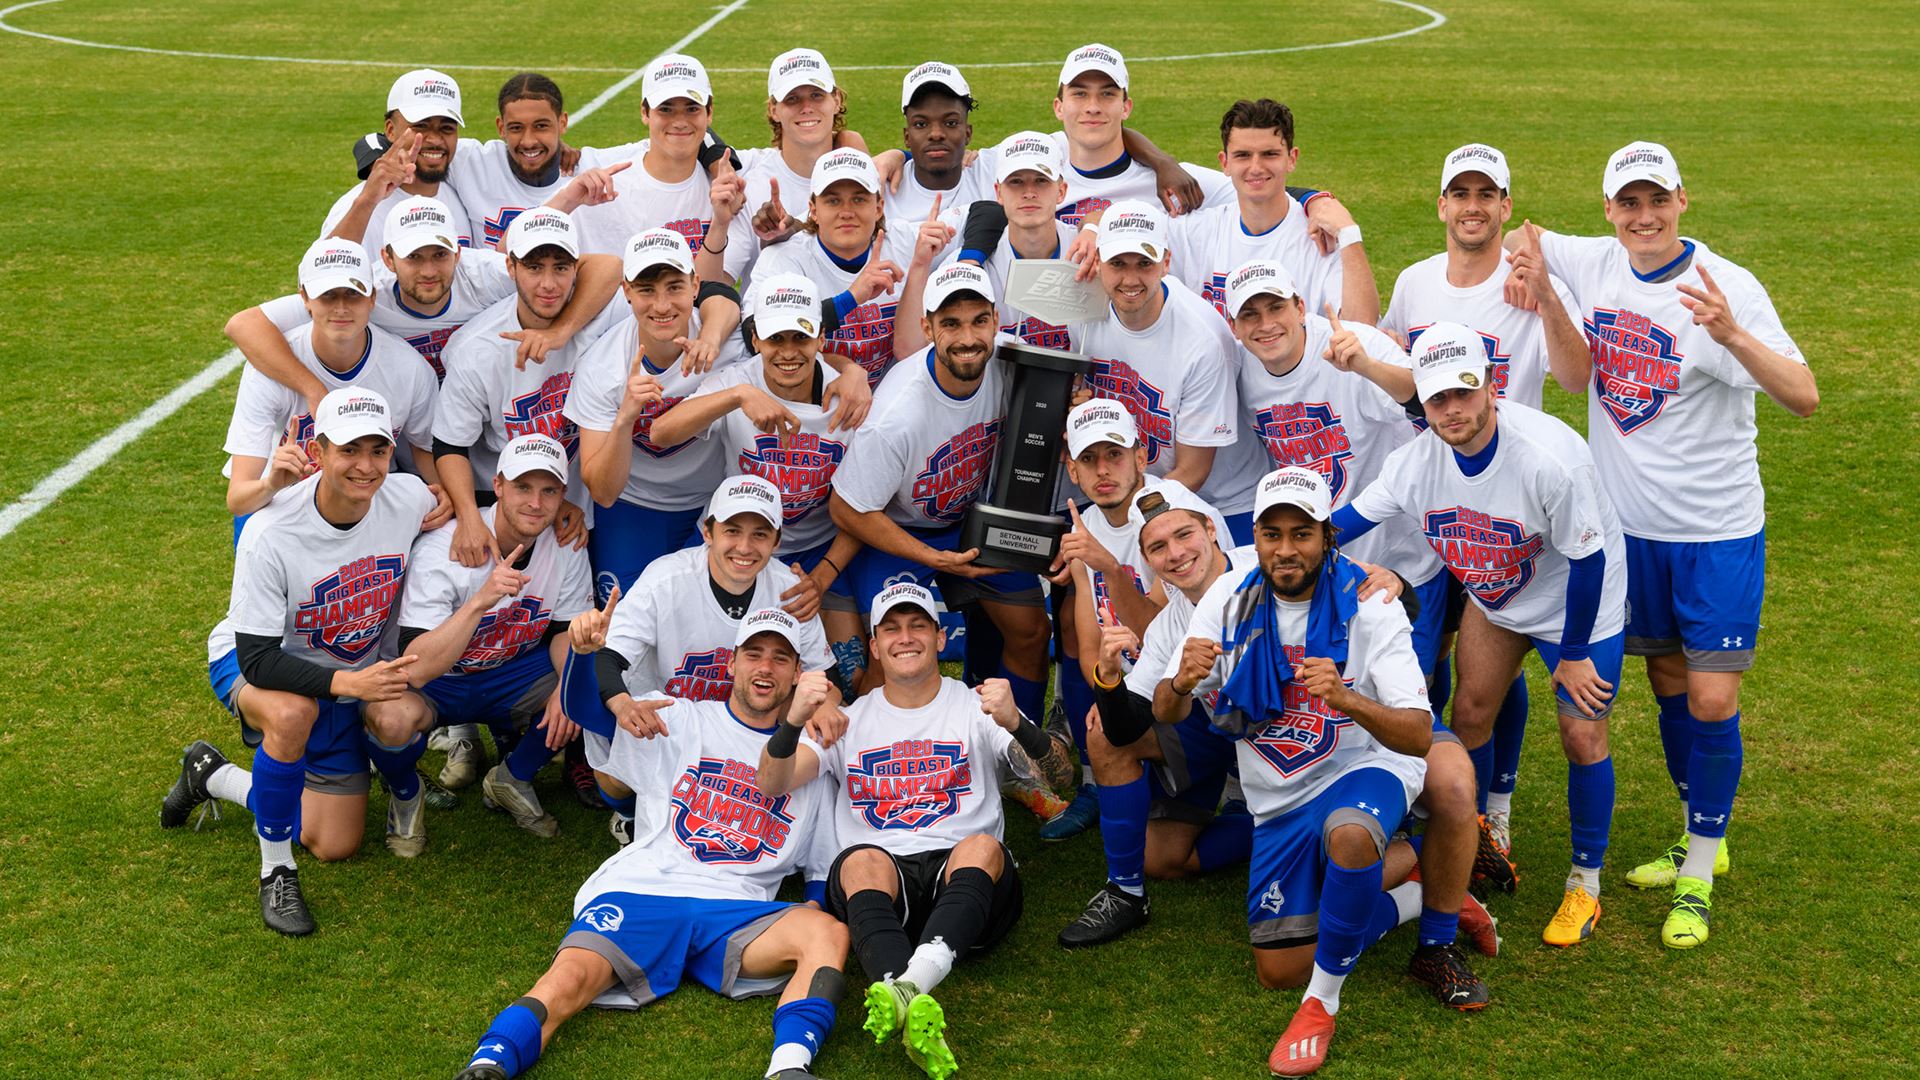 The Seton Hall men's soccer team celebrate their Big East Tournament title victory by posing for a photo.